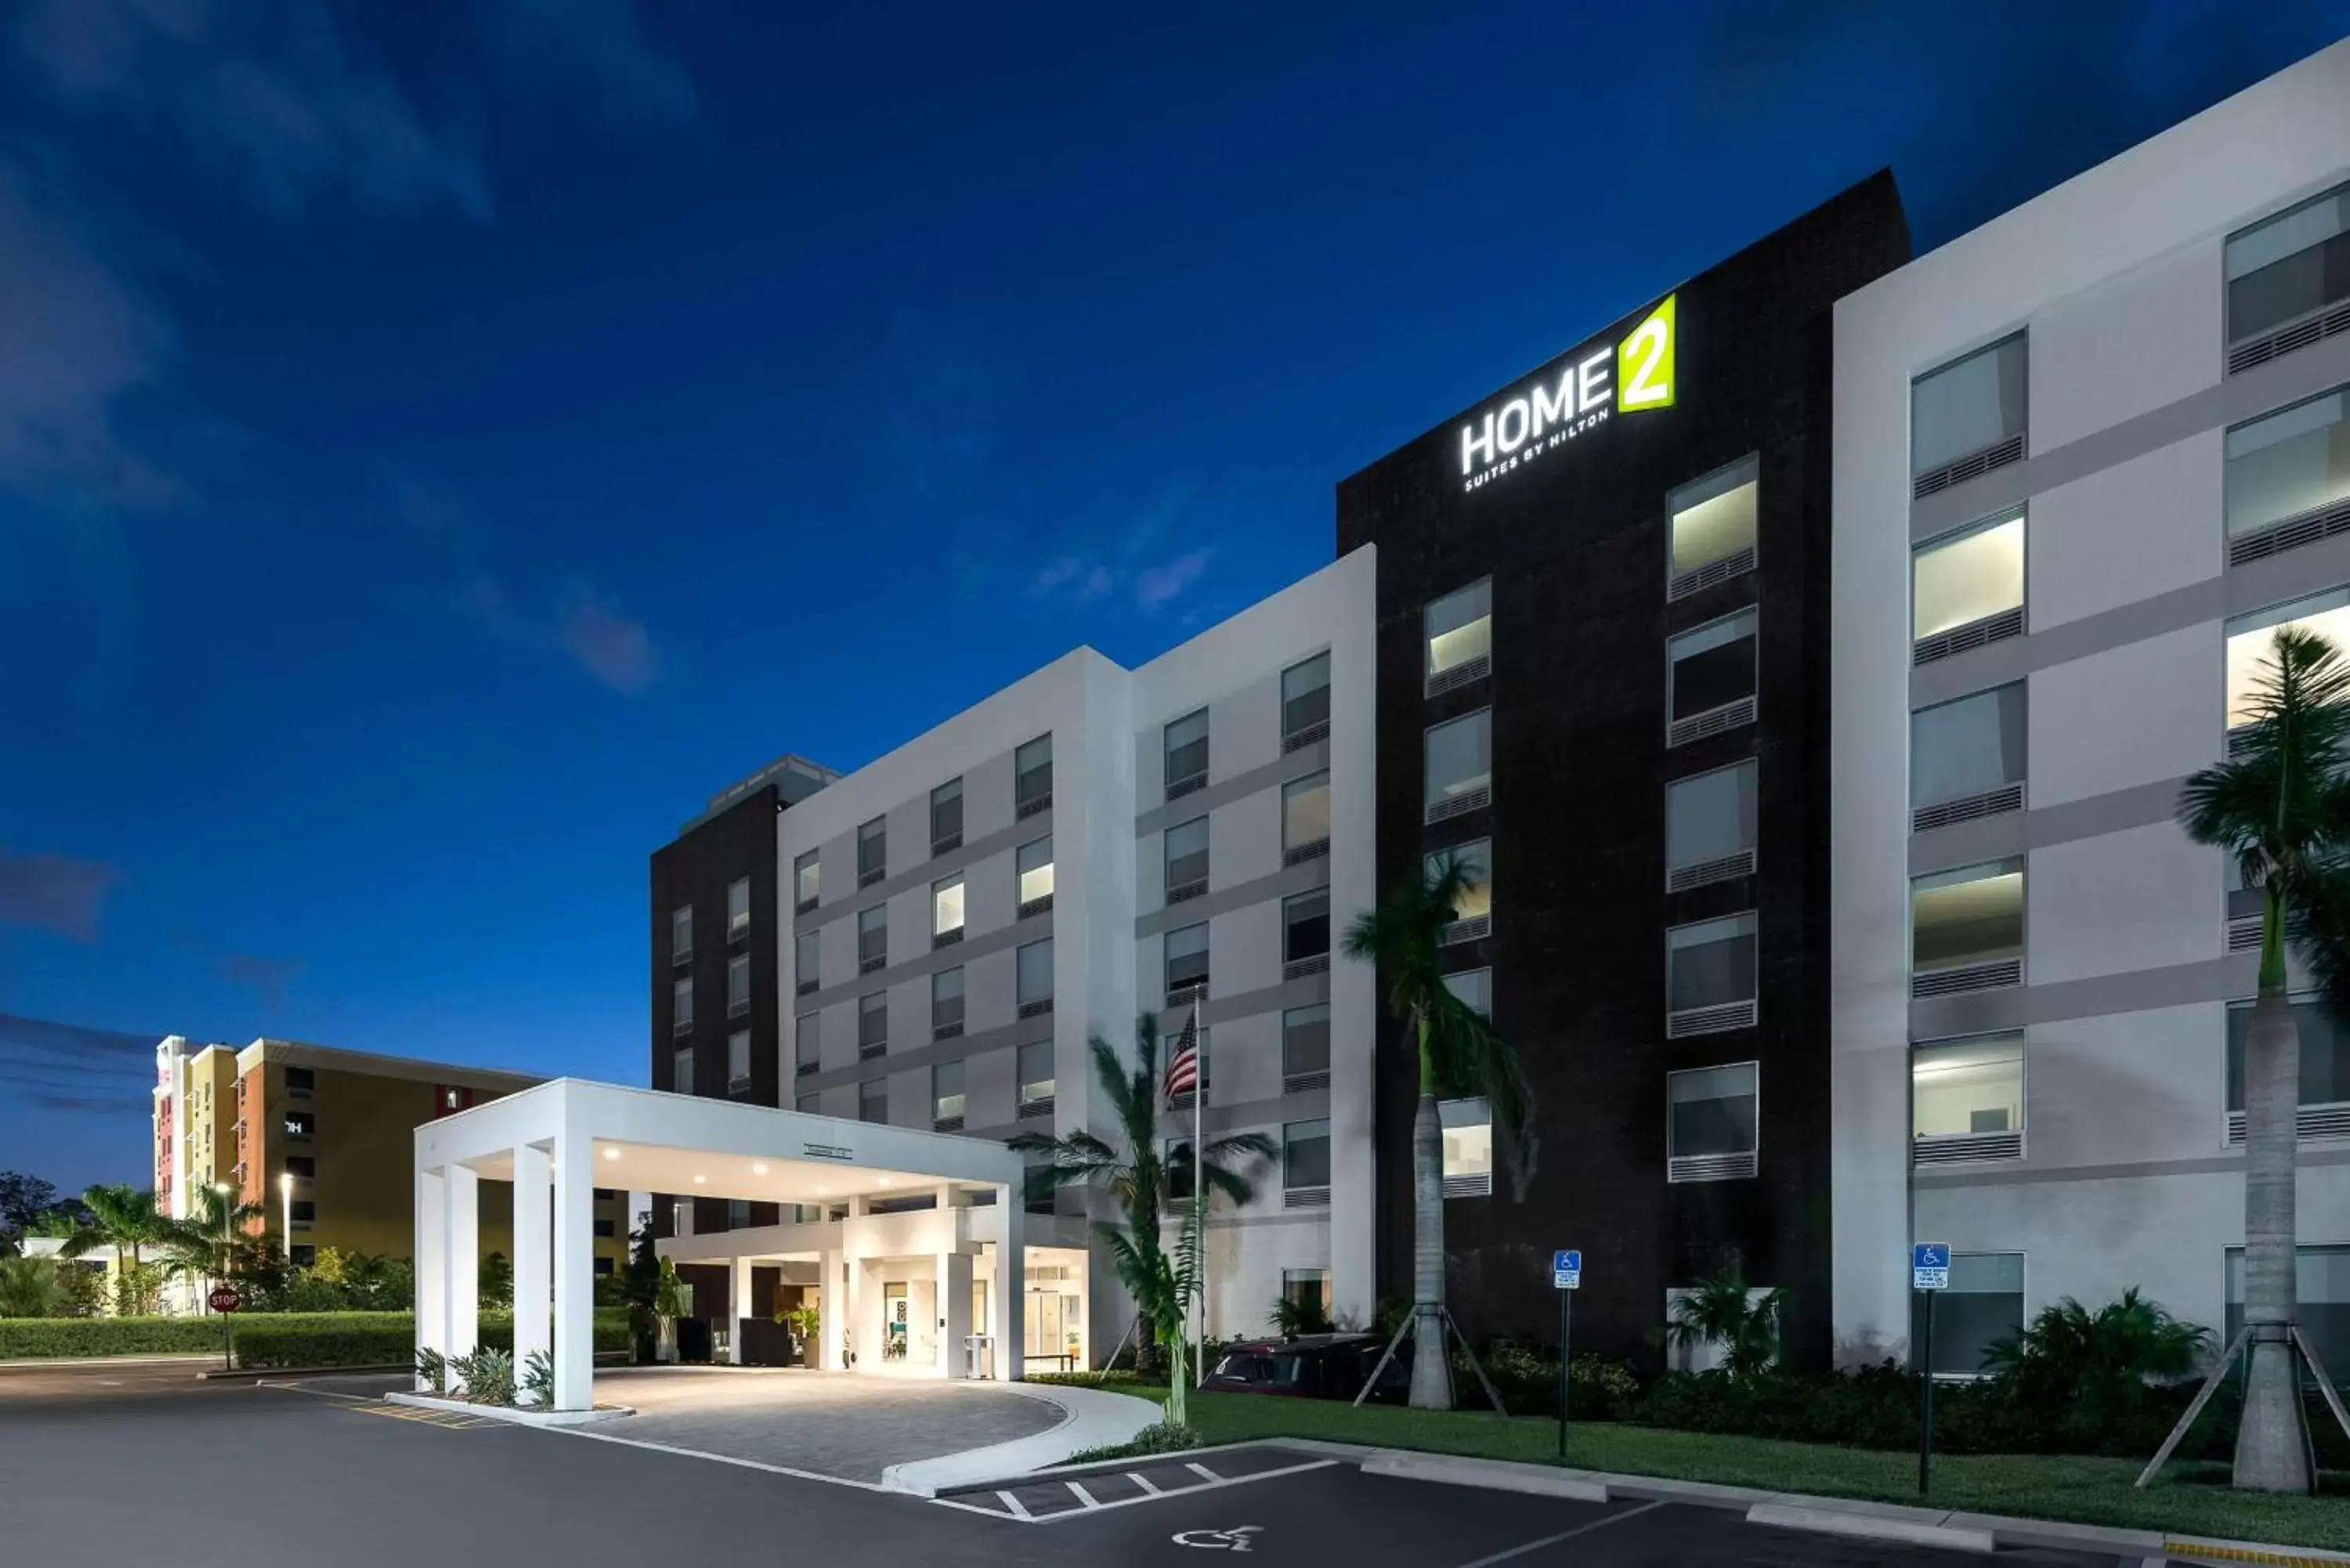 Property Building in Home2 Suites By Hilton Ft. Lauderdale Airport-Cruise Port